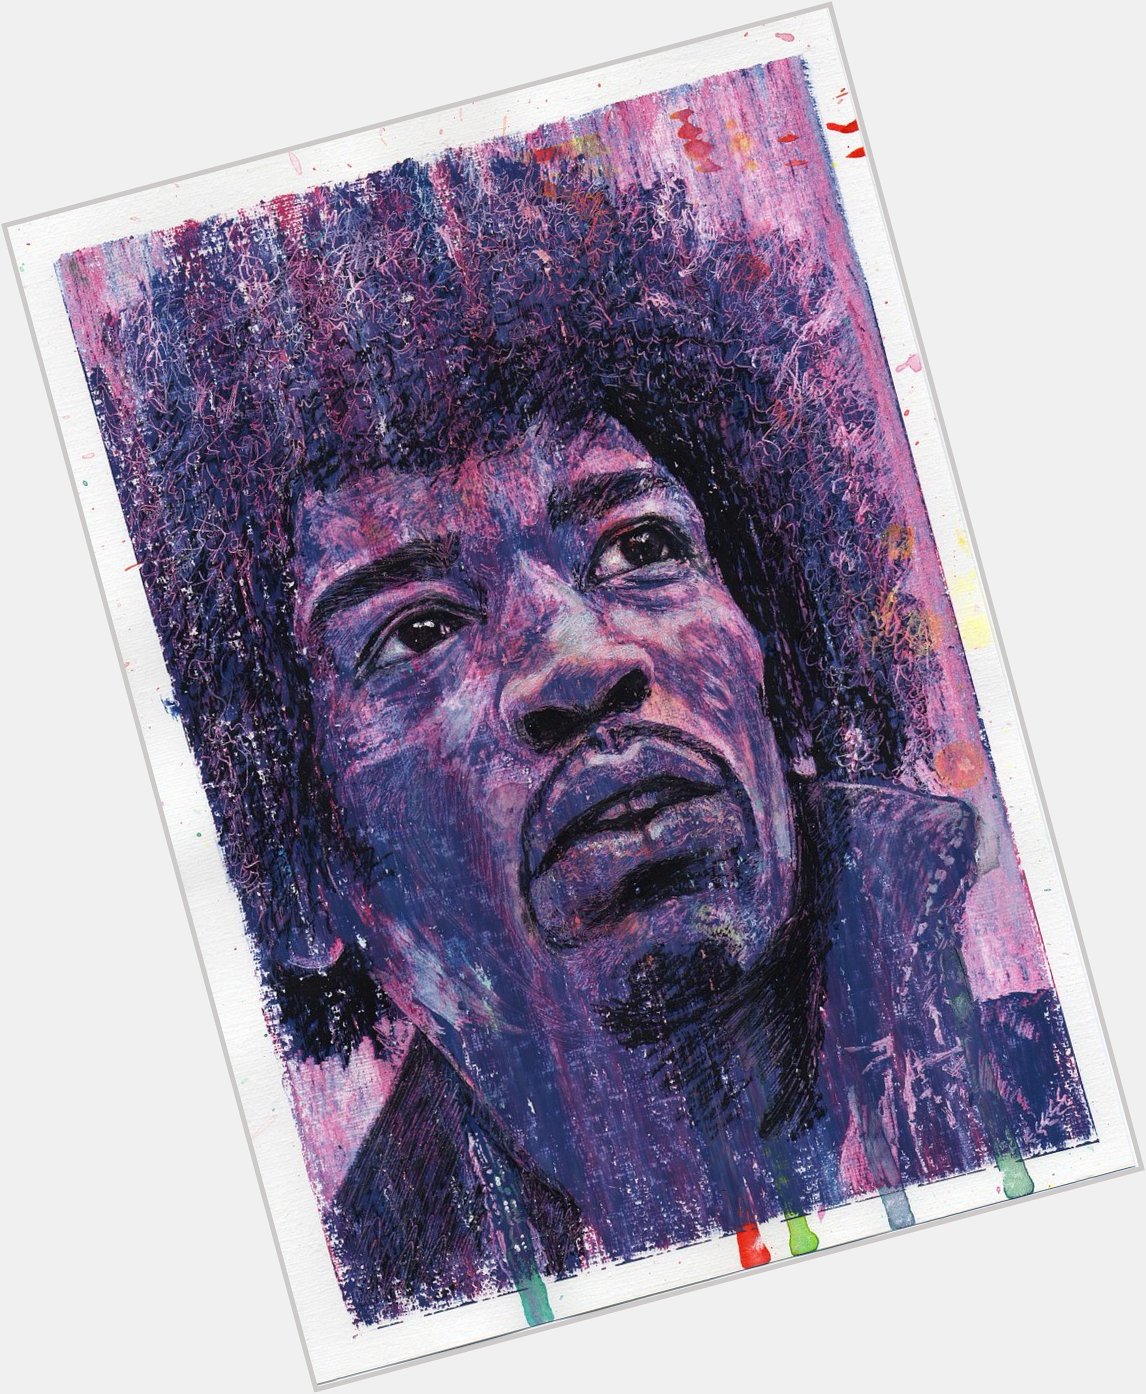 Happy birthday to Jimi Hendrix, born on this day in 1942. This picture: oil and ink on acrylic paper, 21cm x 30cm. 